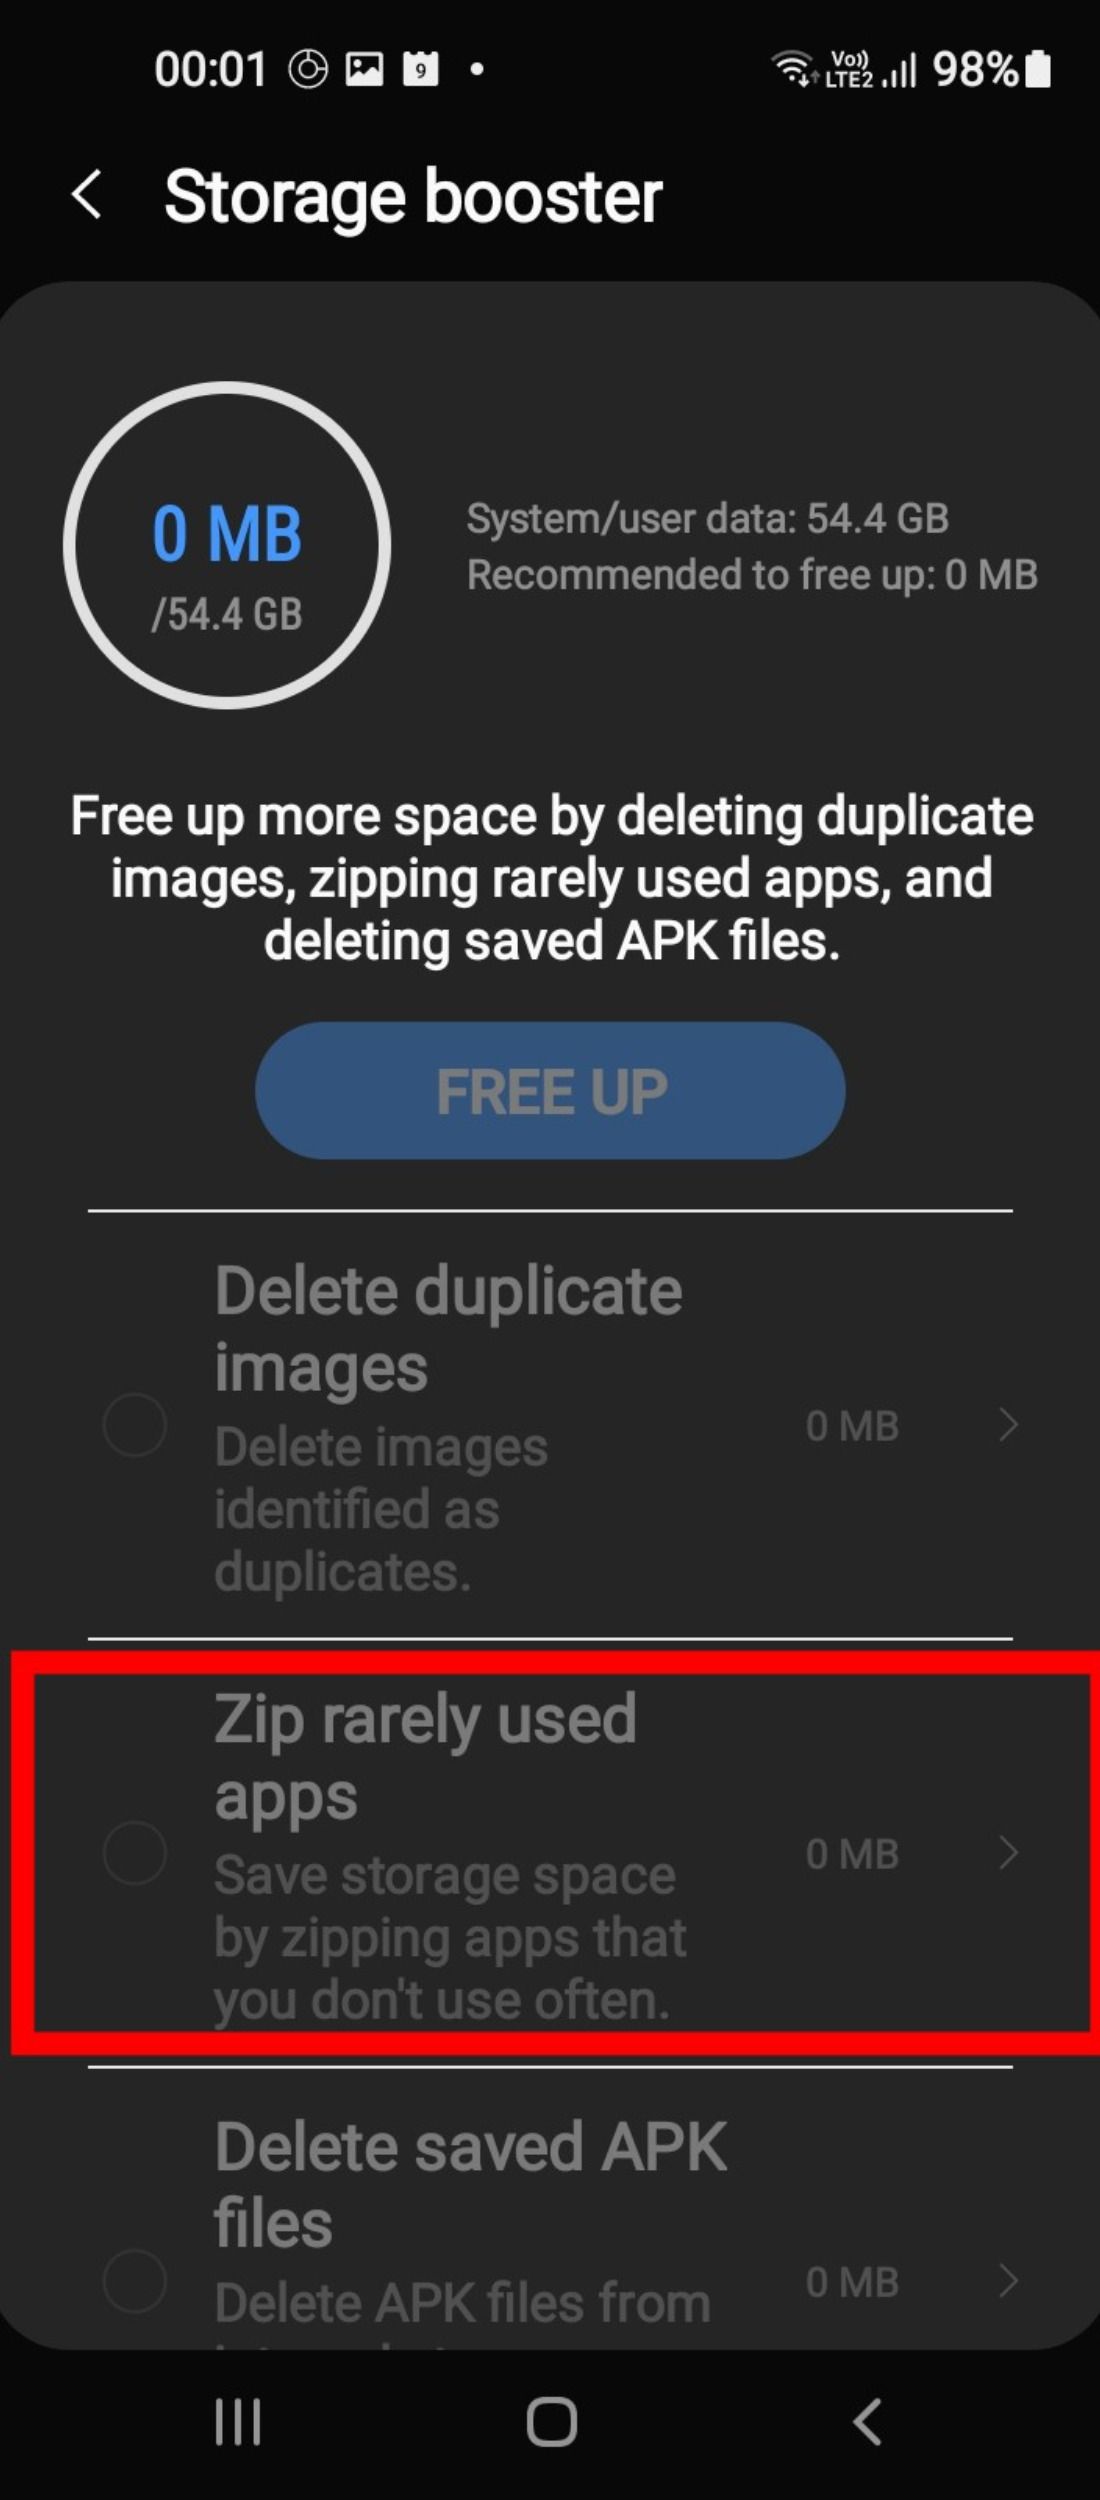 Free up space and zip apps